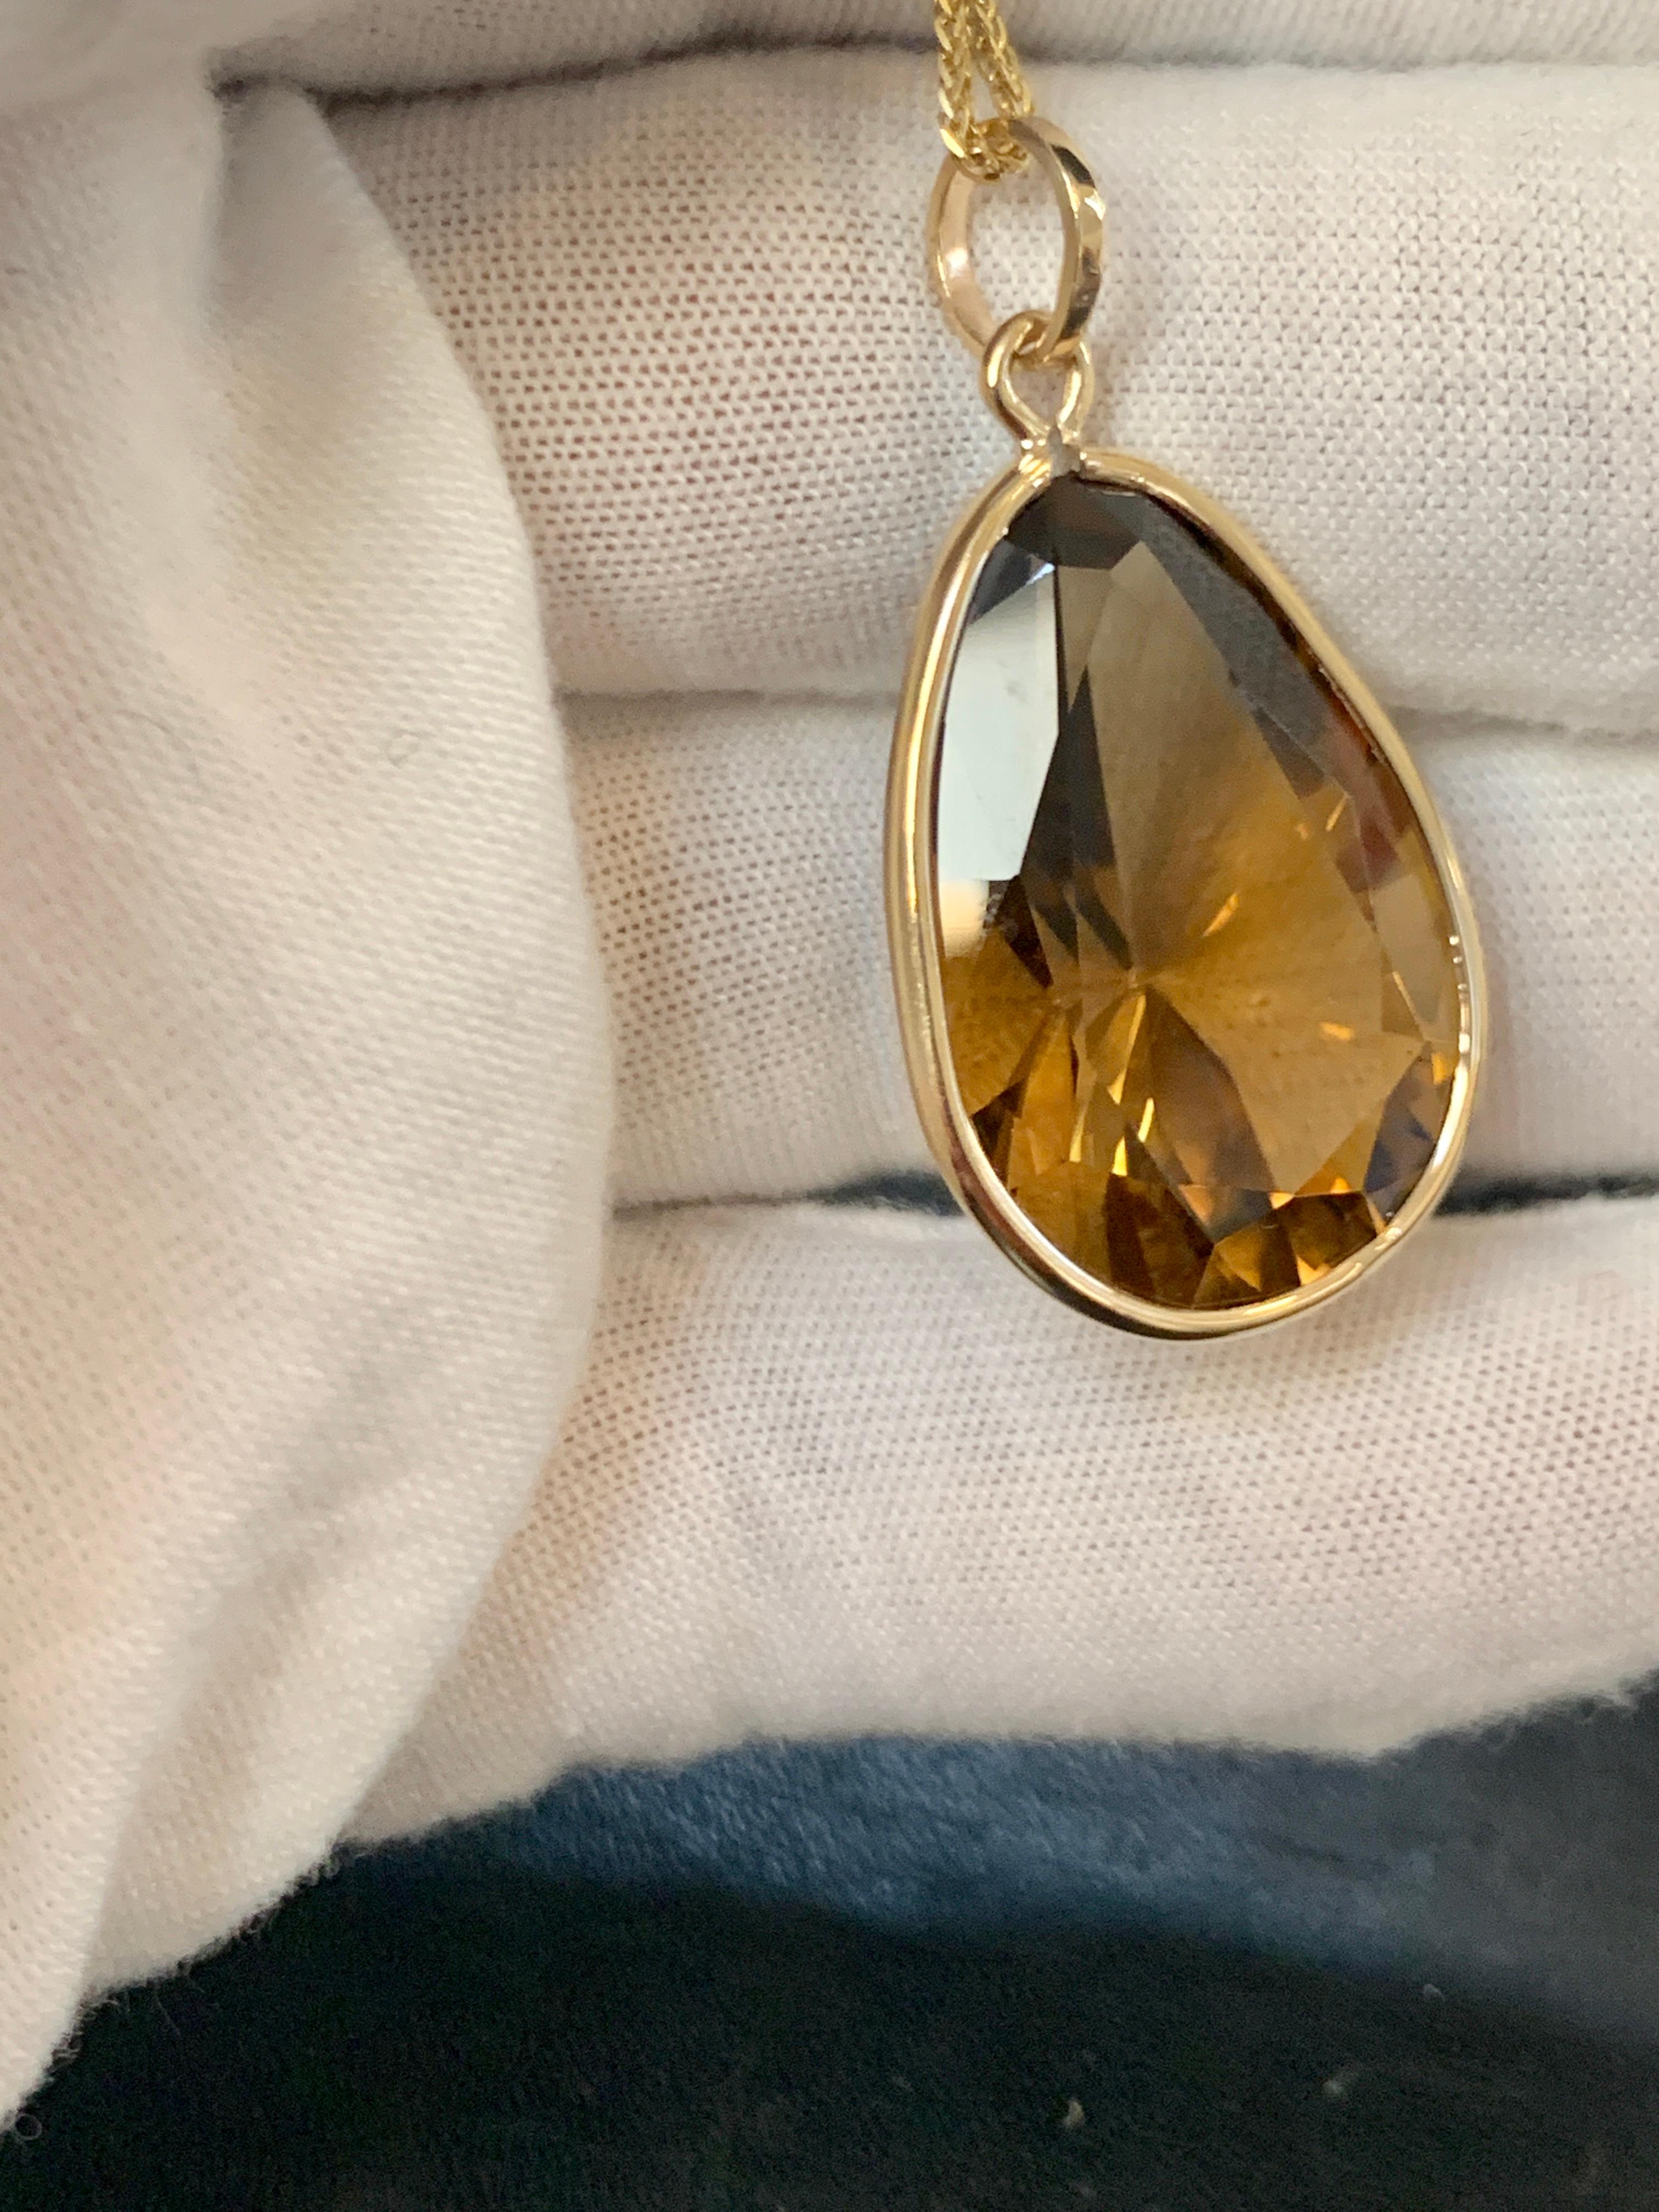 Women's 19 Carat Pear Shape Citrine Pendent or Necklace 14 Karat Yellow Gold with Chain